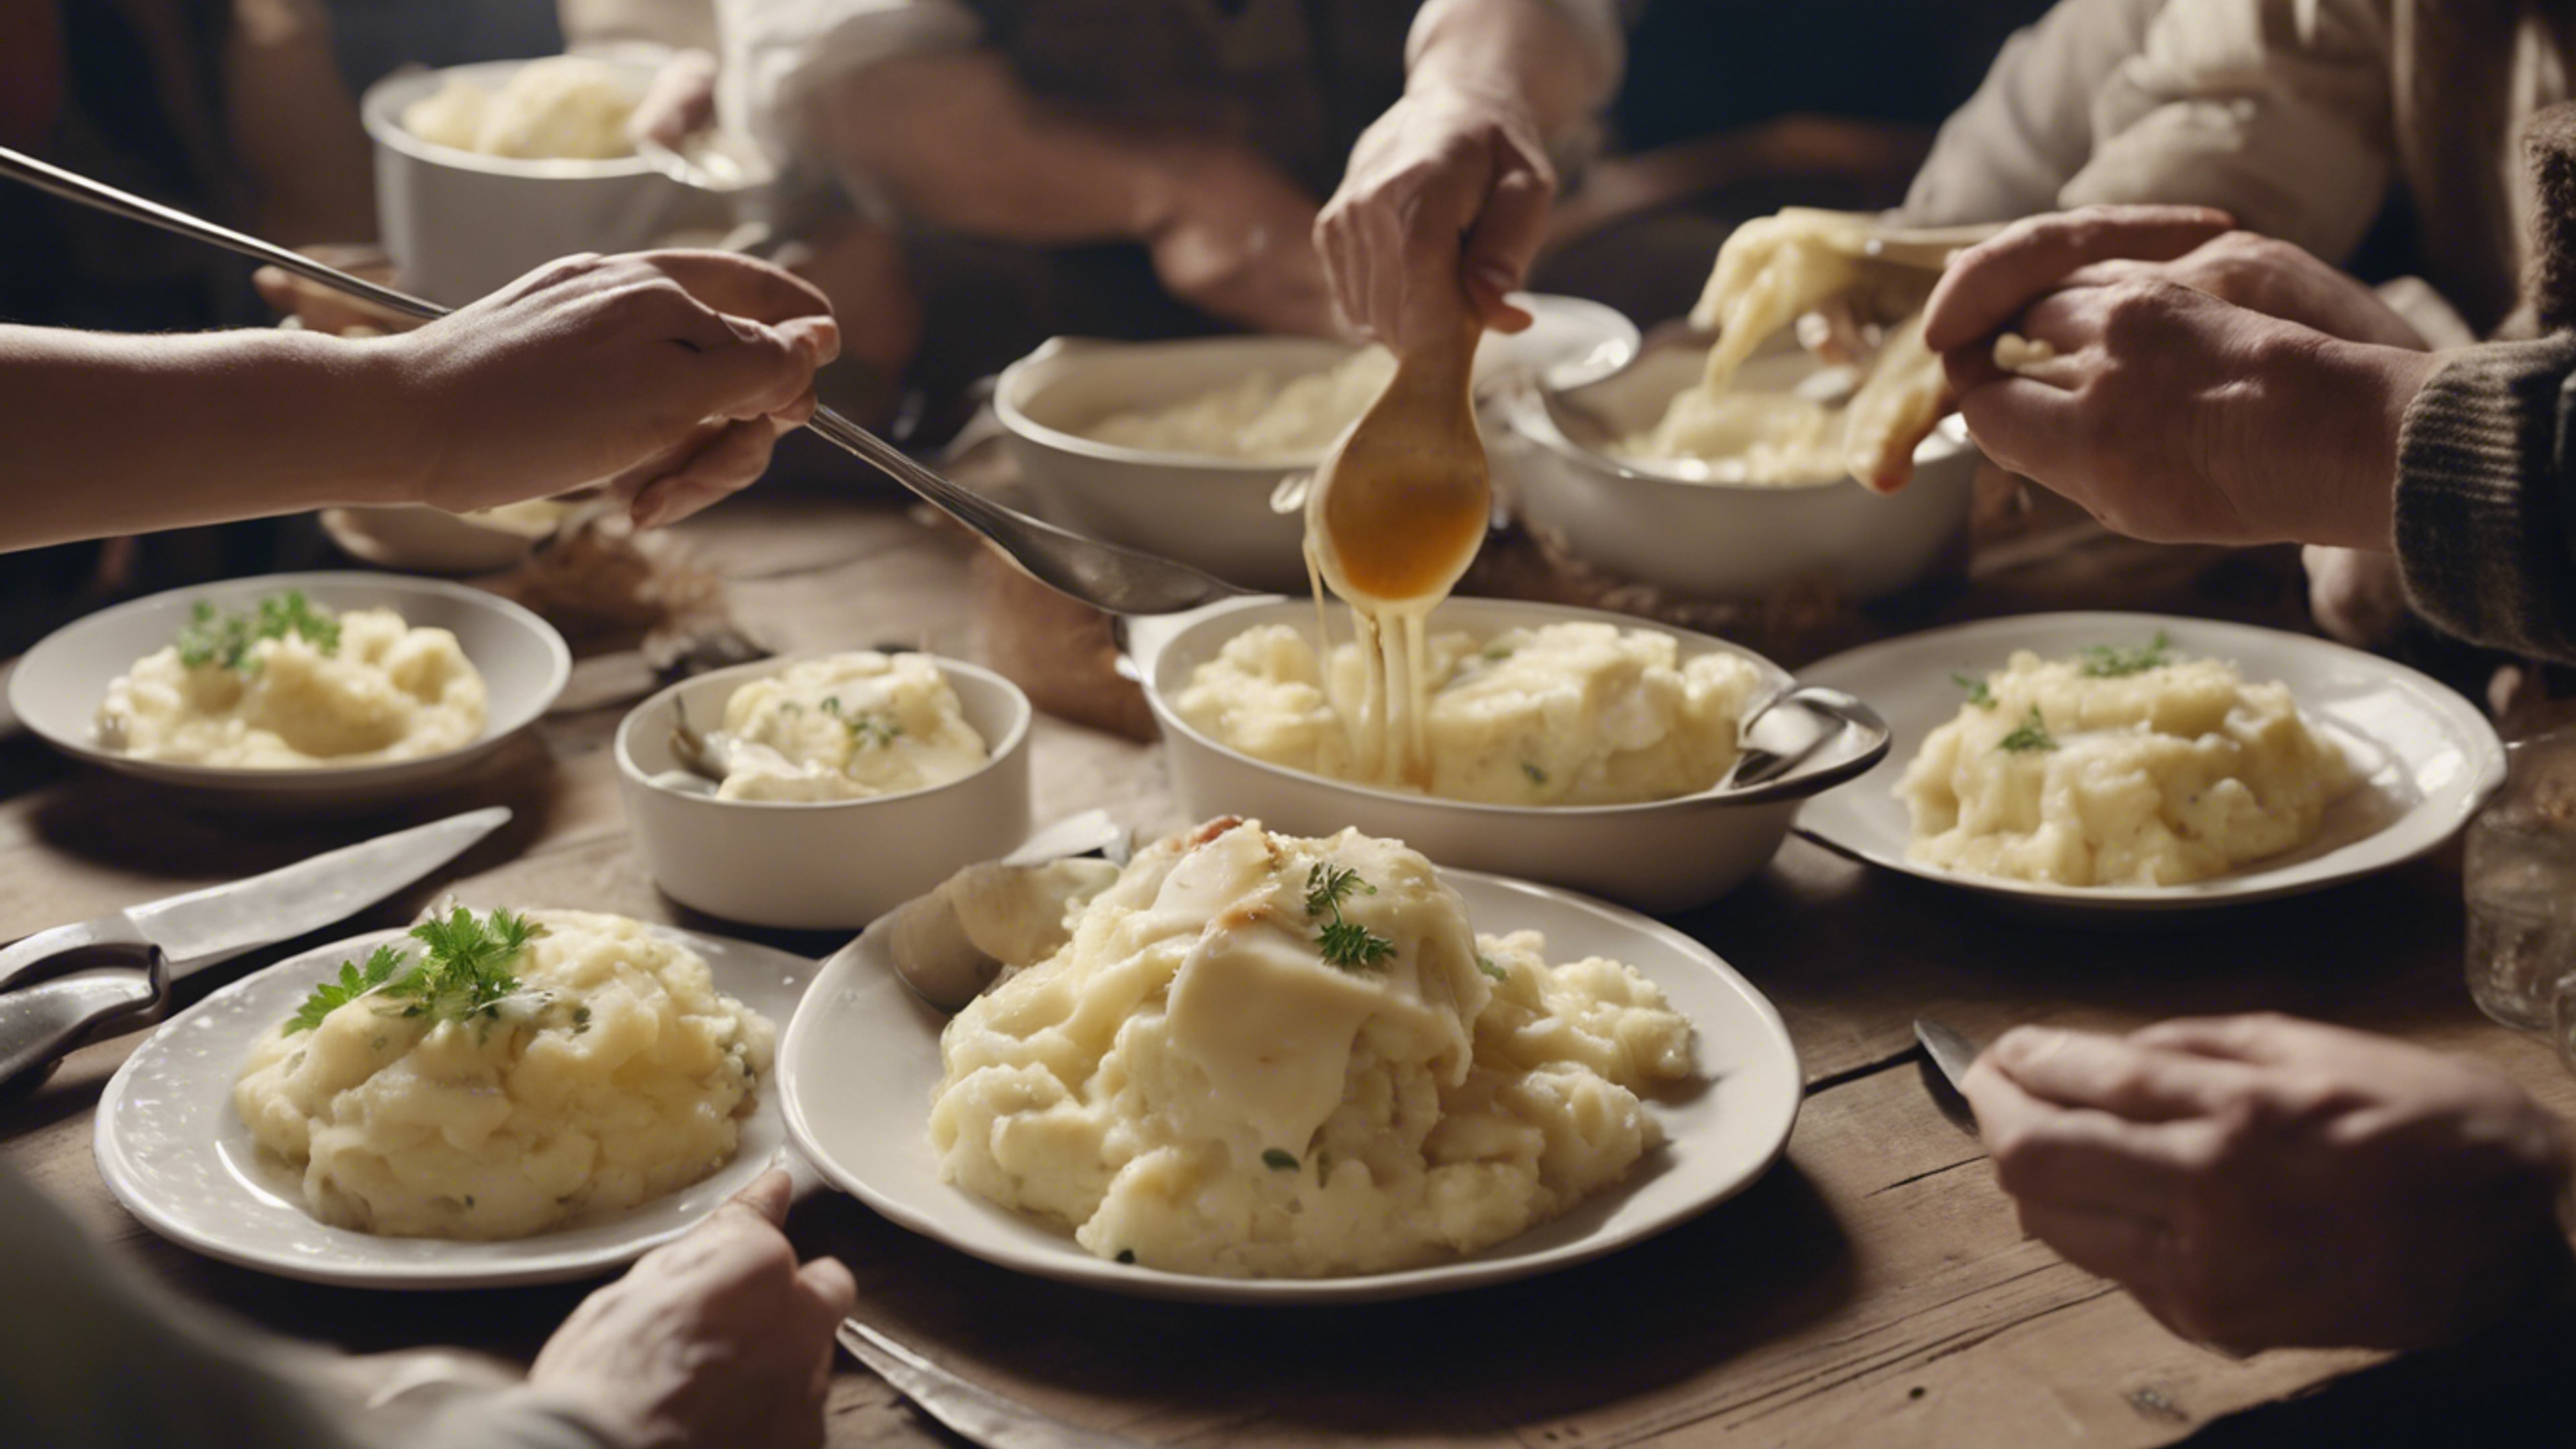 Family and friends serving each other globs of mashed potatoes, slices of turkey, and ladles of gravy while laughing together at a long, rustic wooden dinner table. Wallpaper[f328017b8c8245719096]